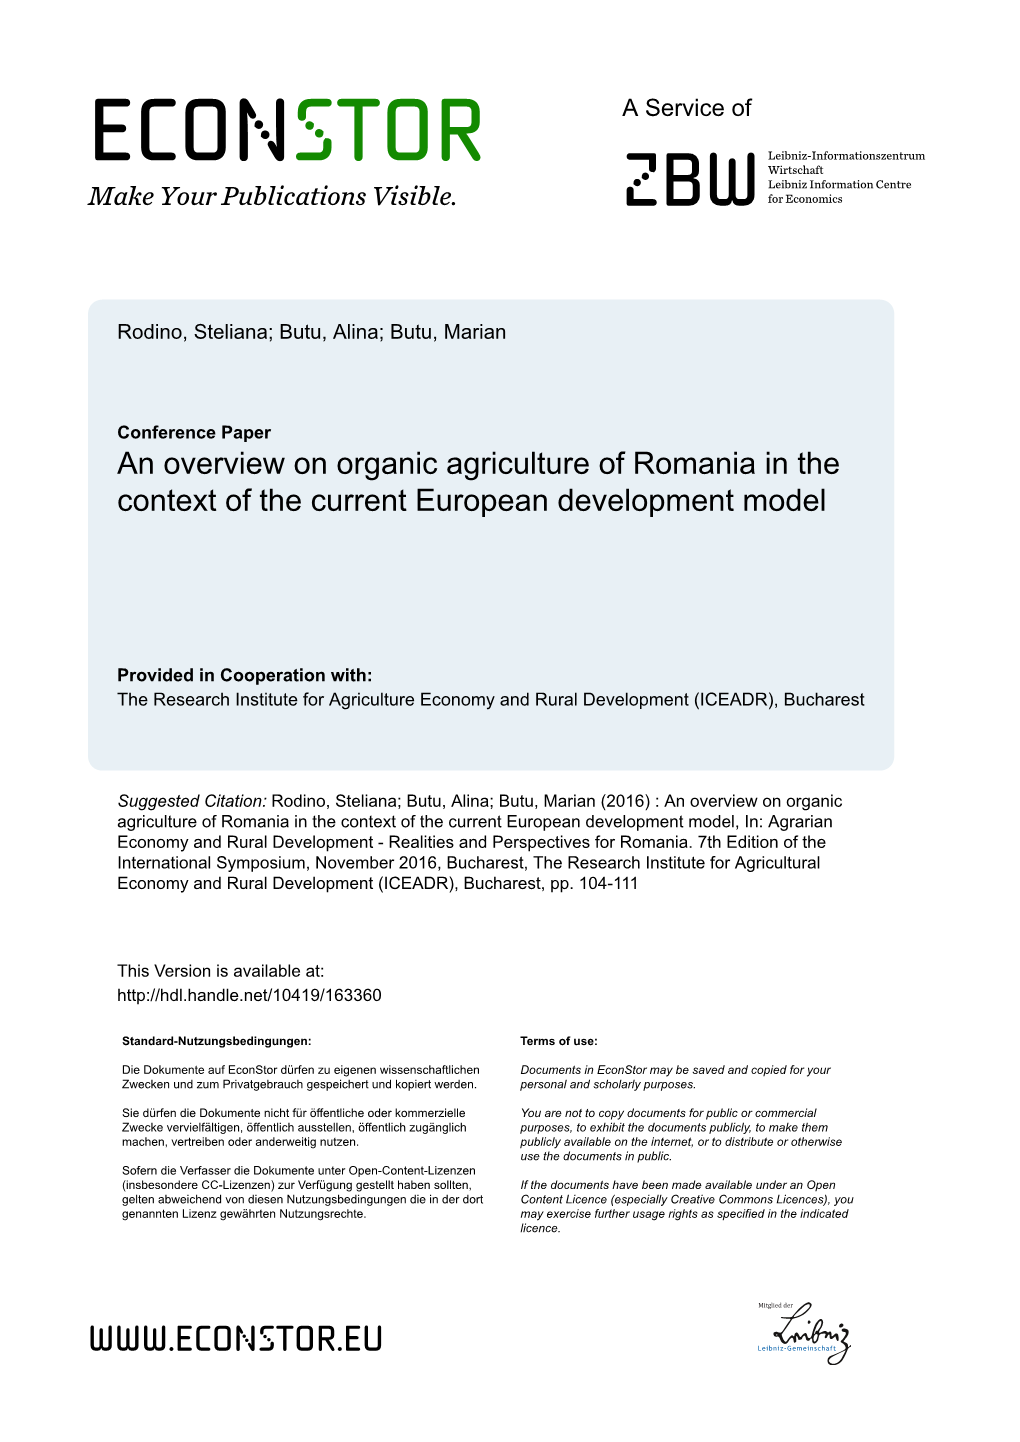 An Overview on Organic Agriculture of Romania in the Context of the Current European Development Model